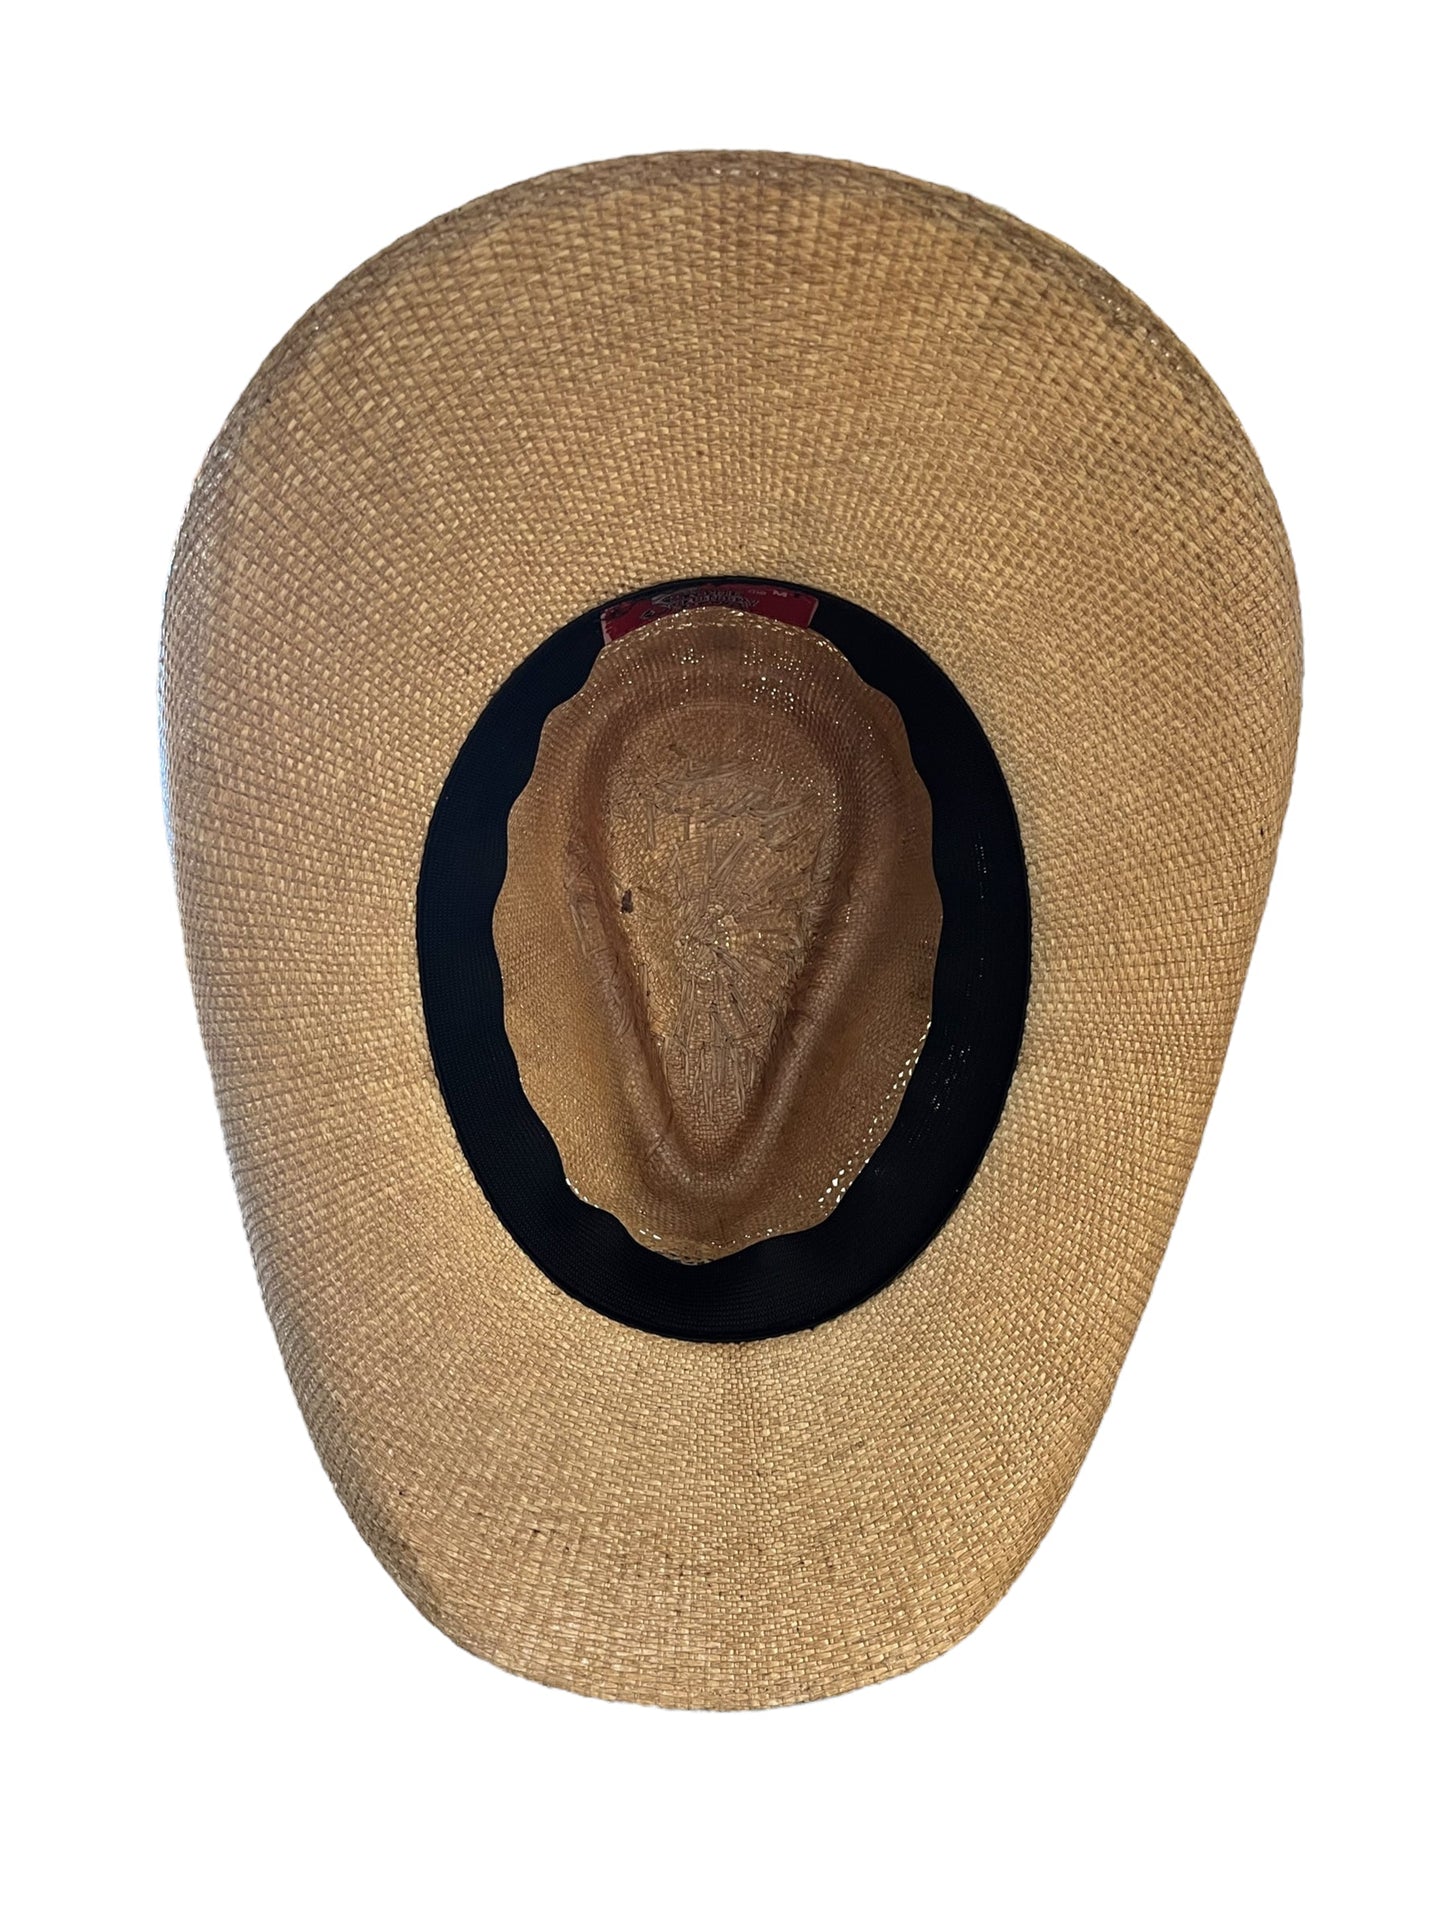 Our straw hat has a 3-3/4 inch brim and 4 inch  inch crown